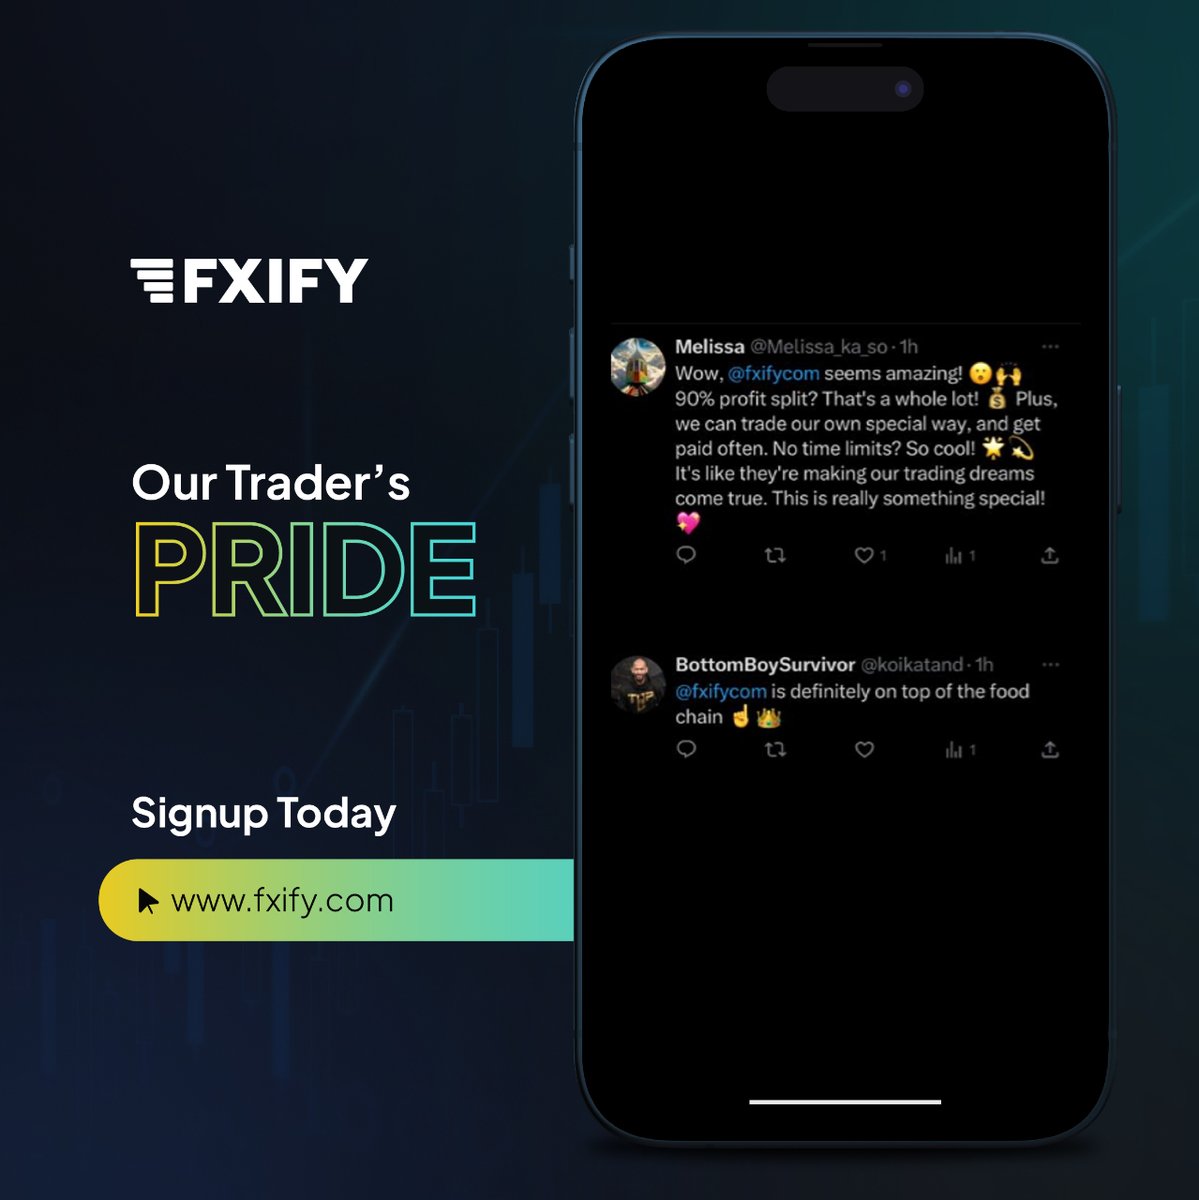 Traders are buzzing about FXIFY's features! Yes, We offer industry-leading payouts and customizable options✅